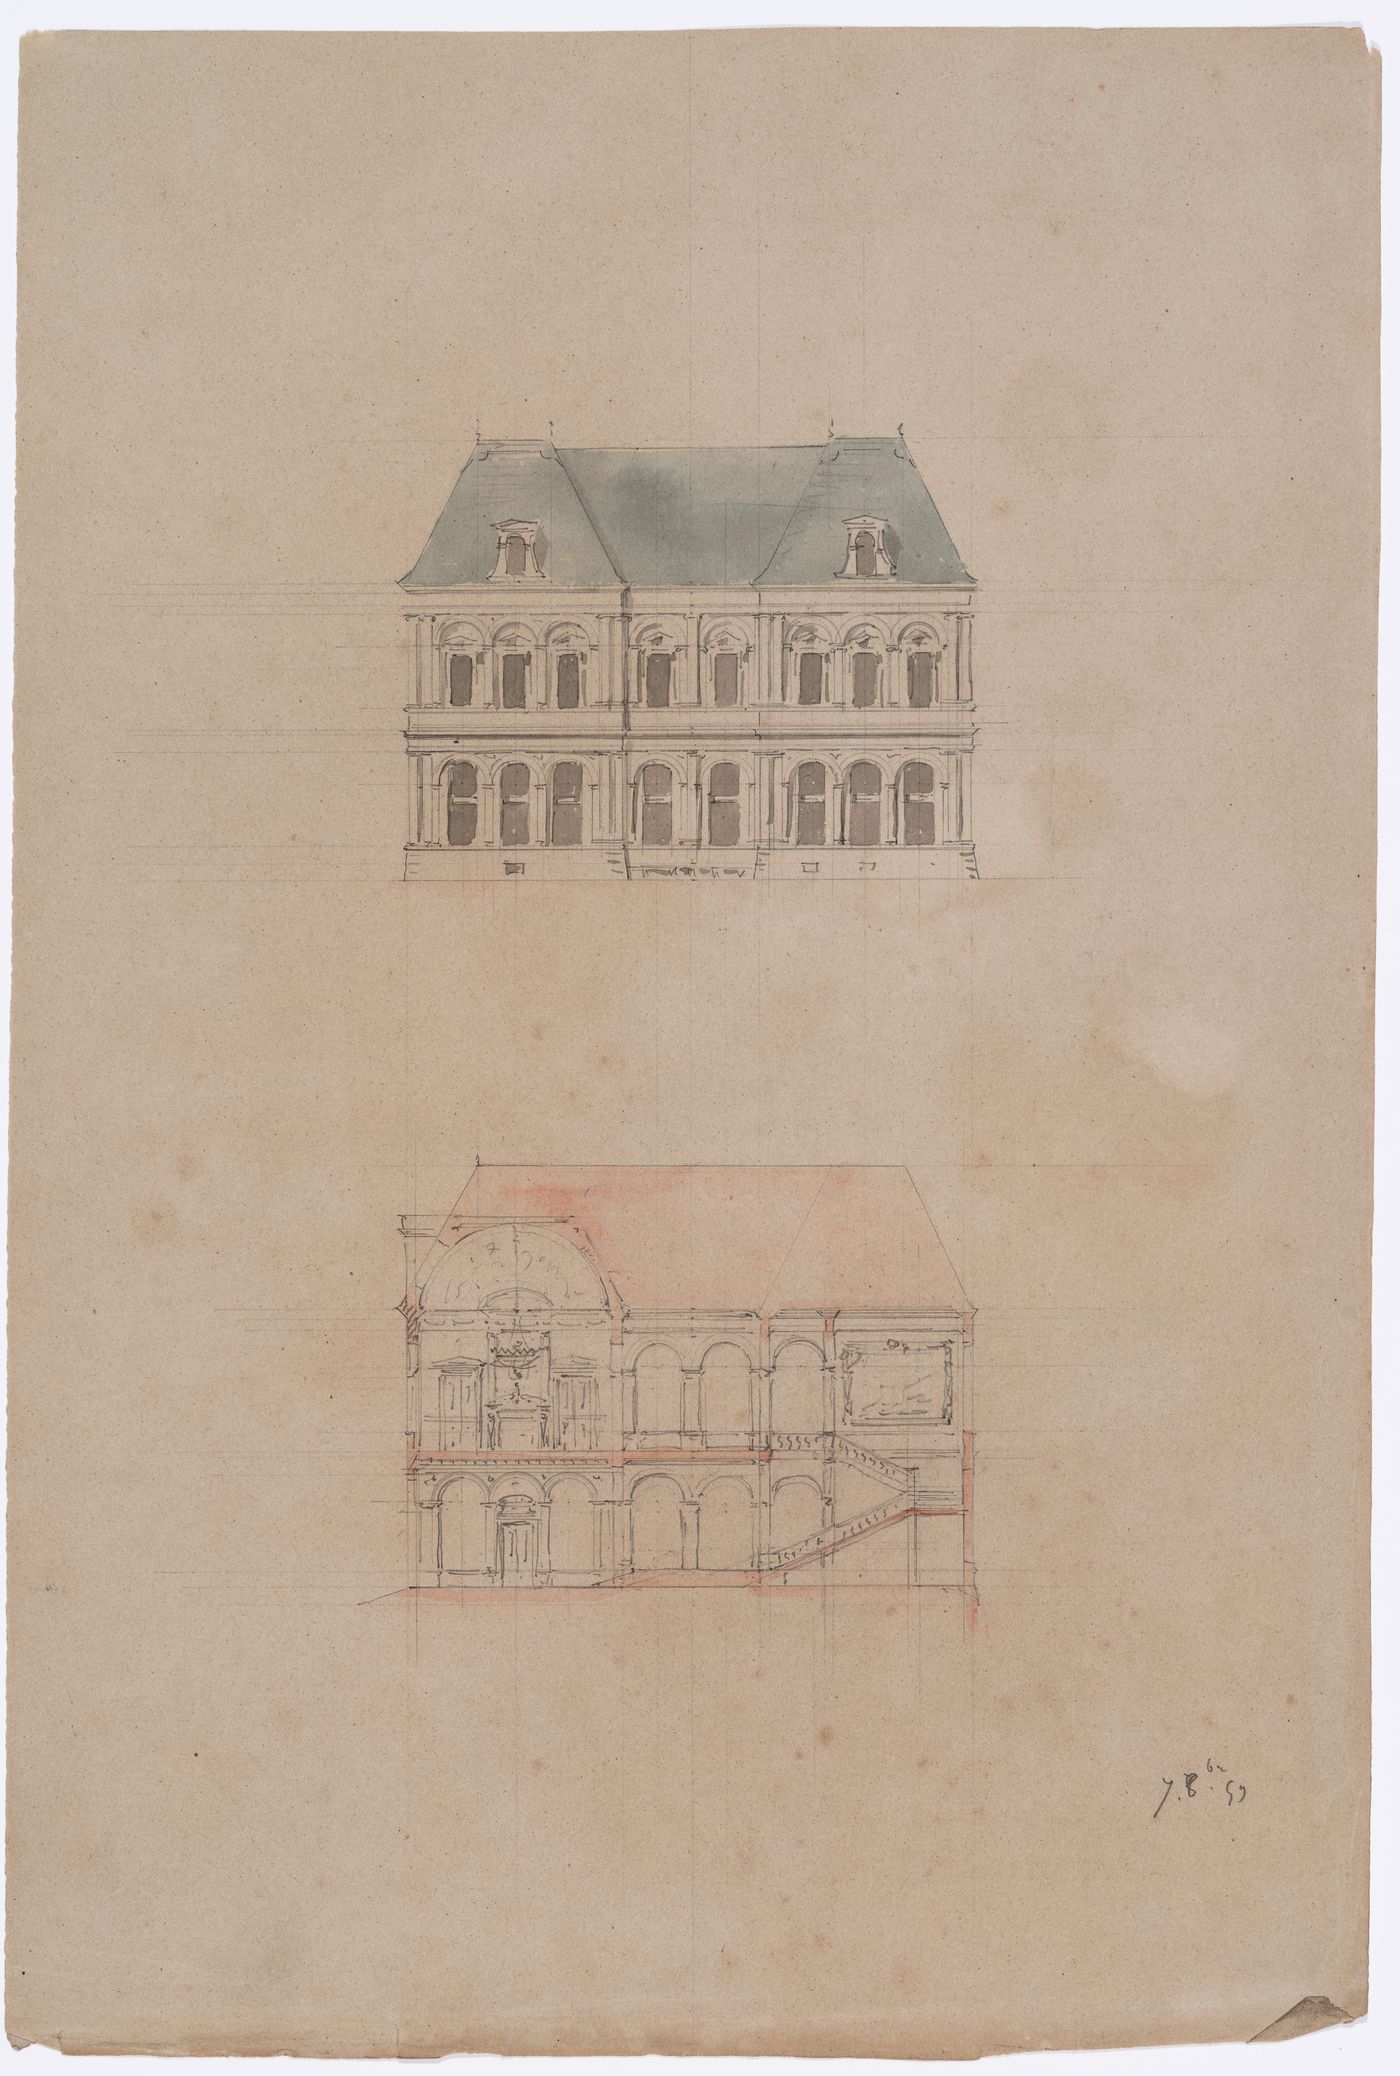 Project for a Hôtel de ville, Poitiers: Side elevation and cross section